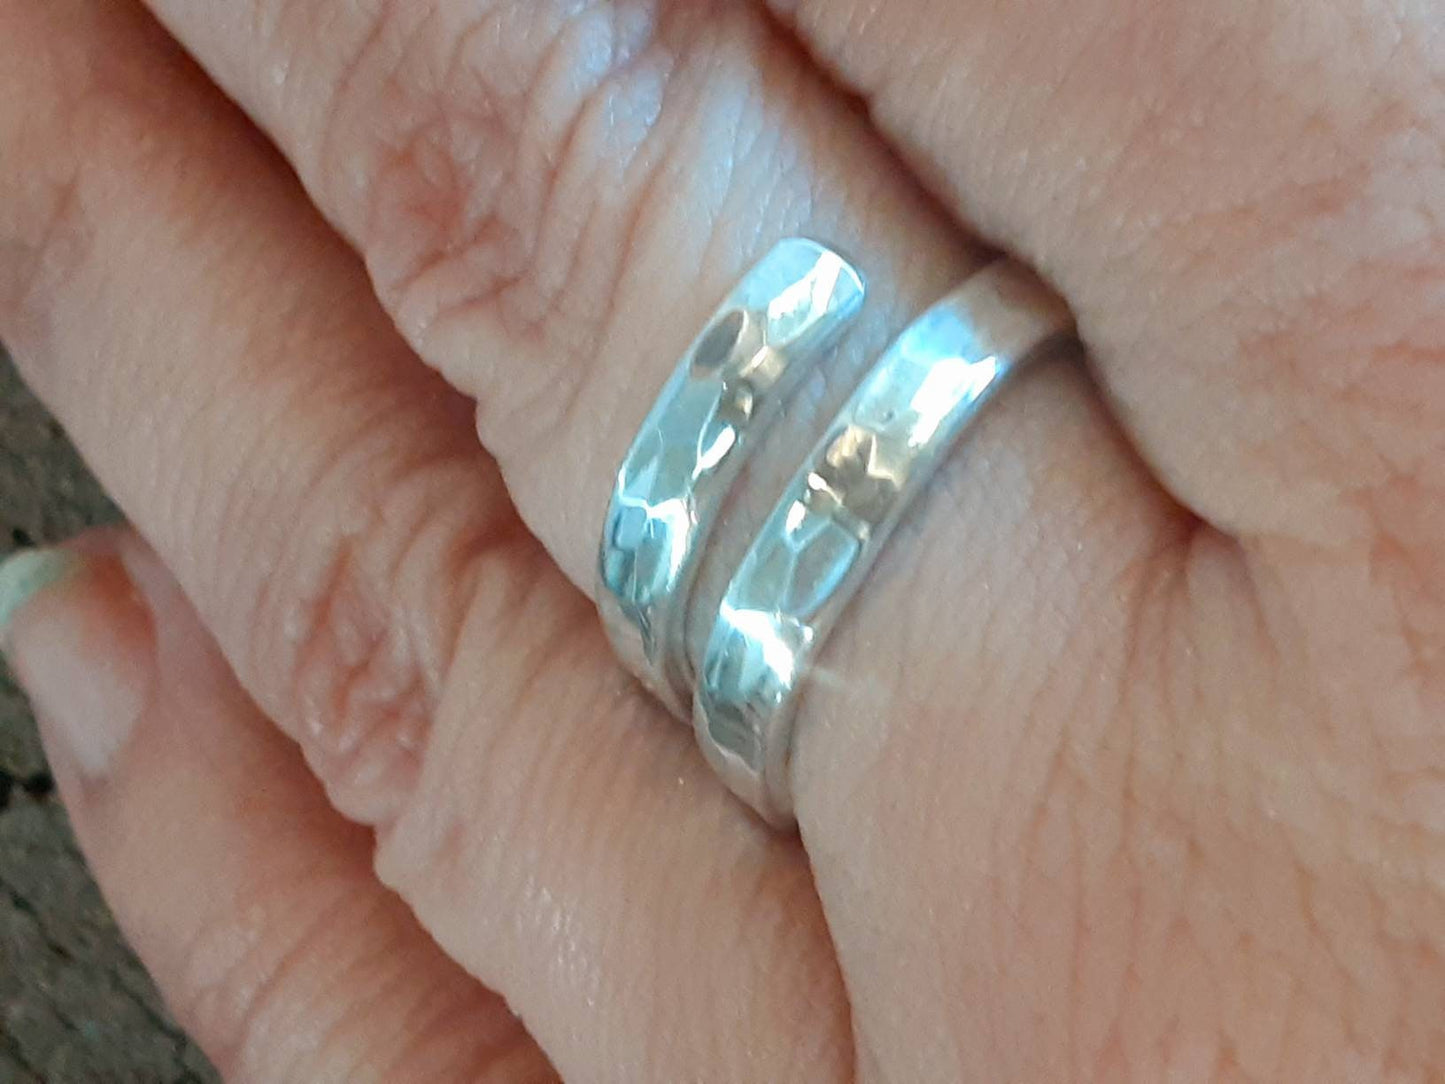 Bypass wrap style sterling silver ring with hammered finish and  polish - choose your ring size